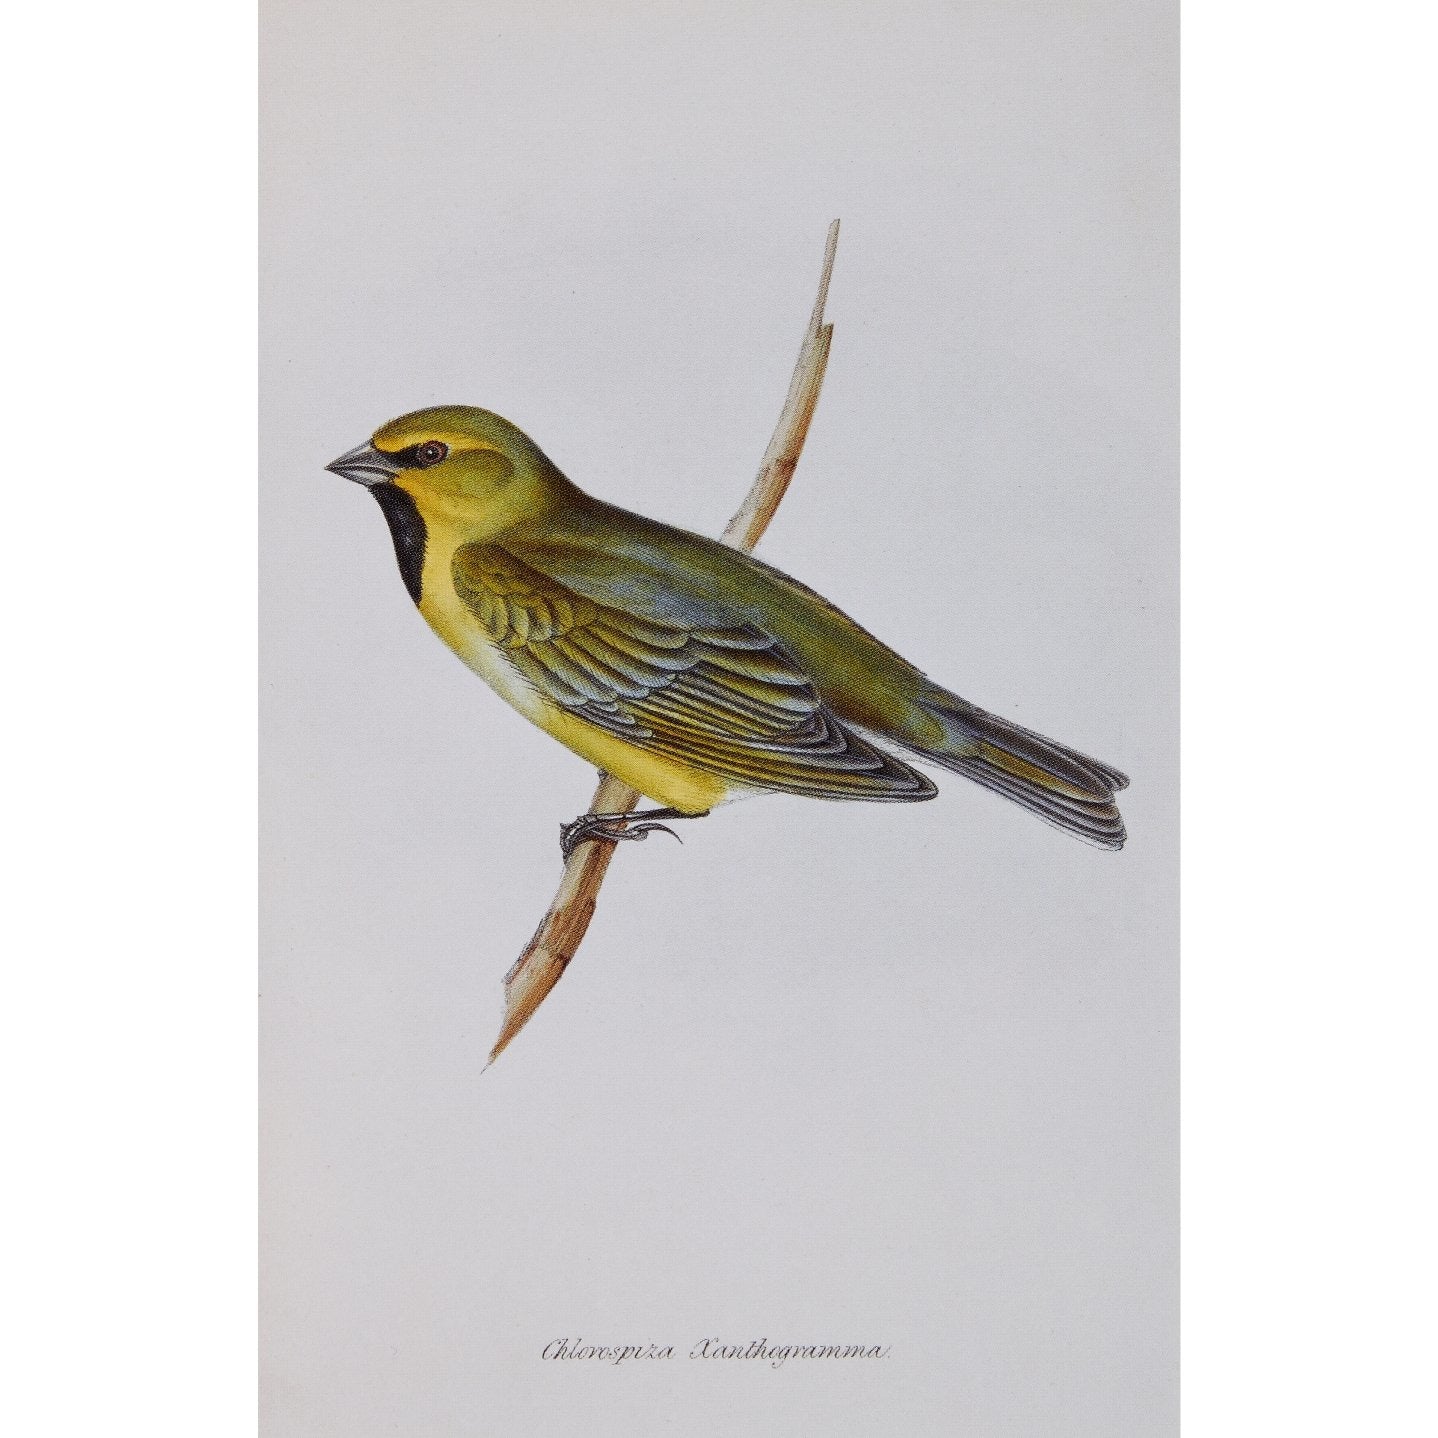 Notecard - Chlorospiza xanthogramma finch by J. Gould. From the collection of Cambridge University Library, brought to you by CuratingCambridge.co.uk